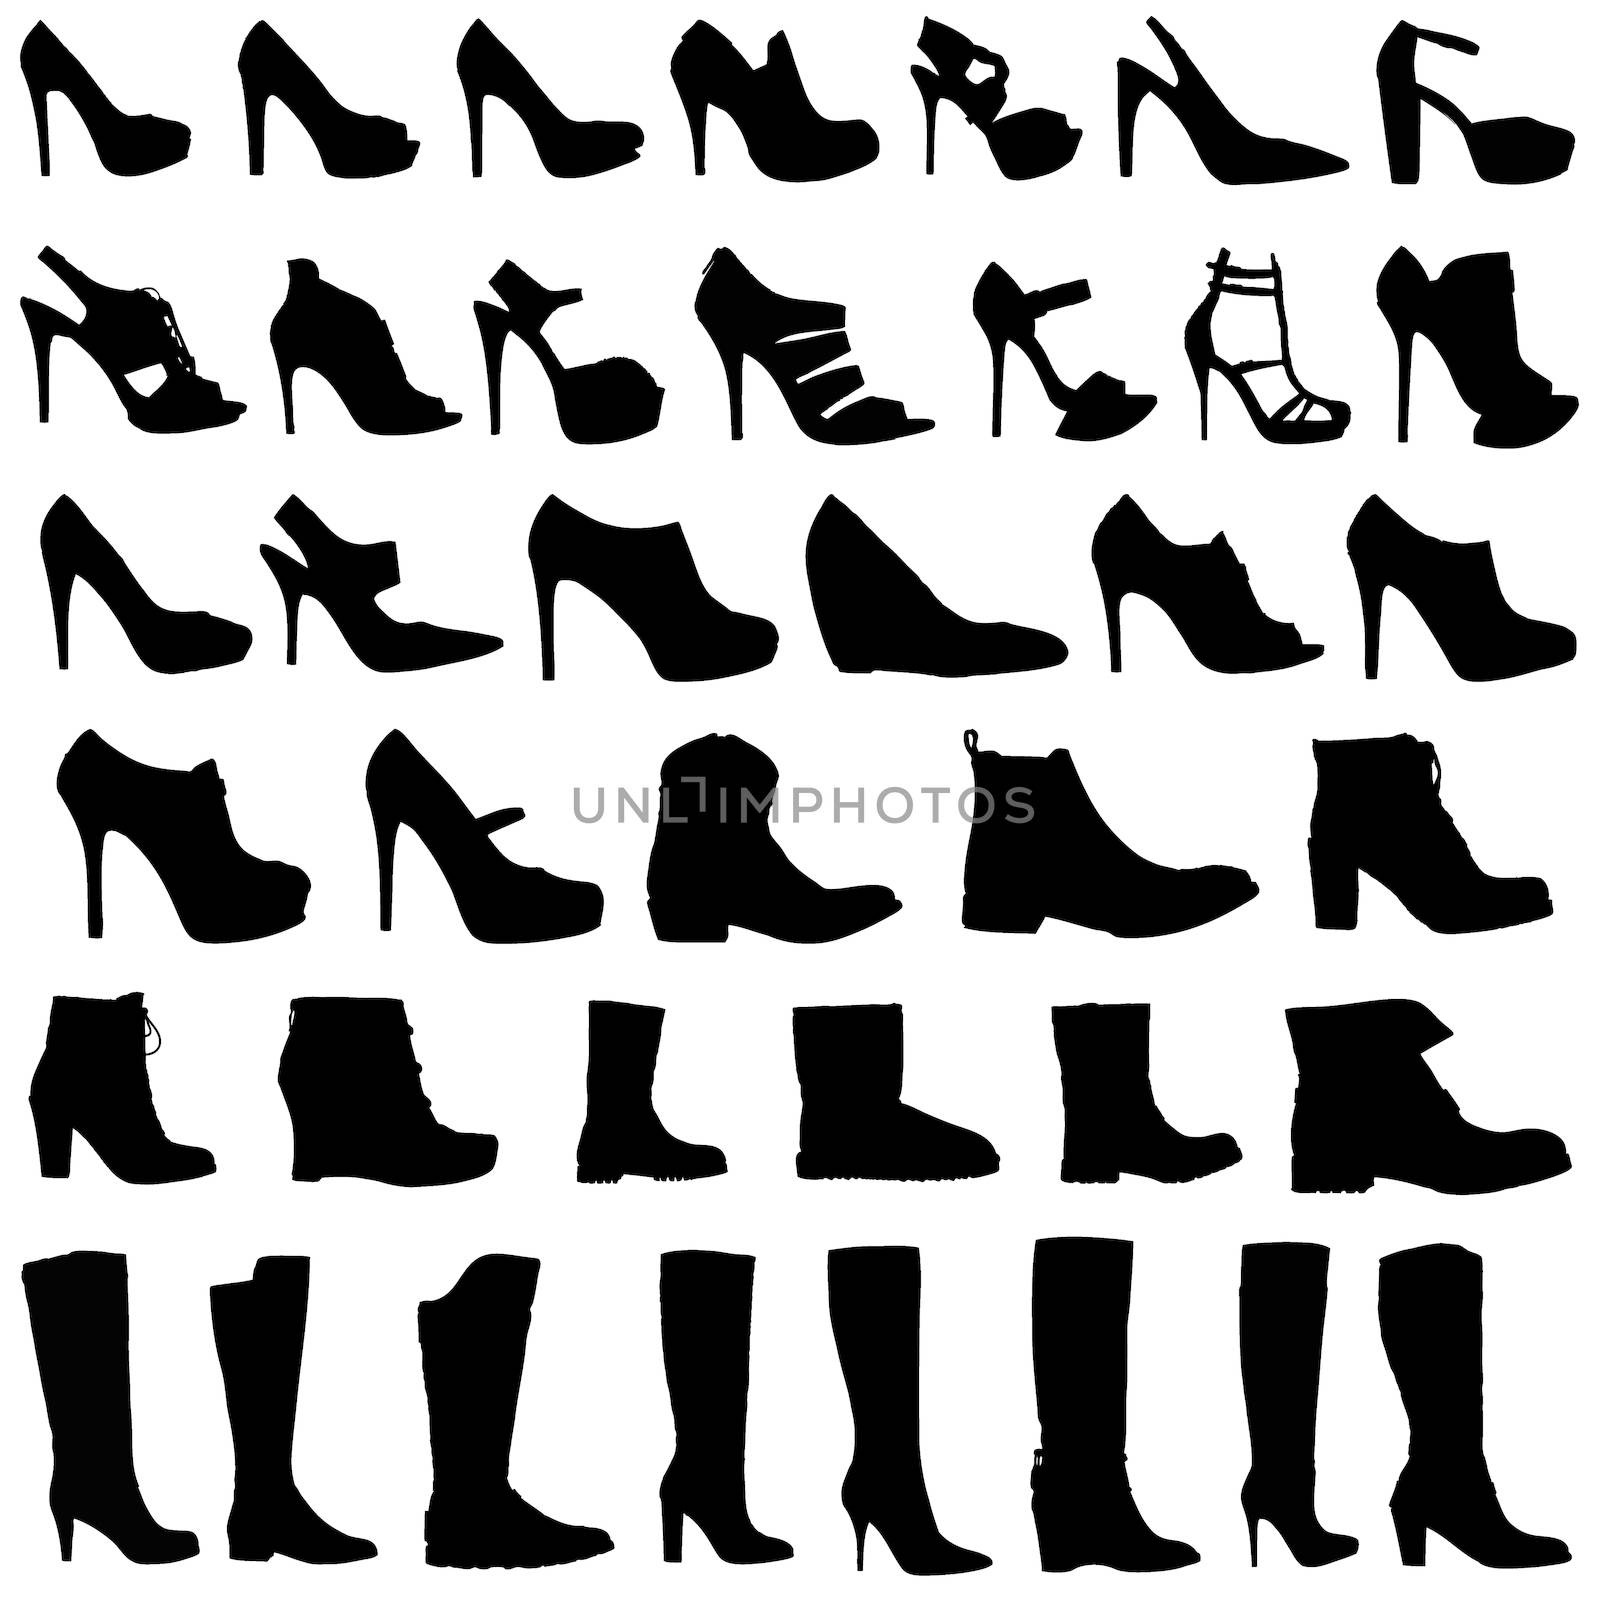 Illustration of Womens shoes and boots icon set by DragonEyeMedia